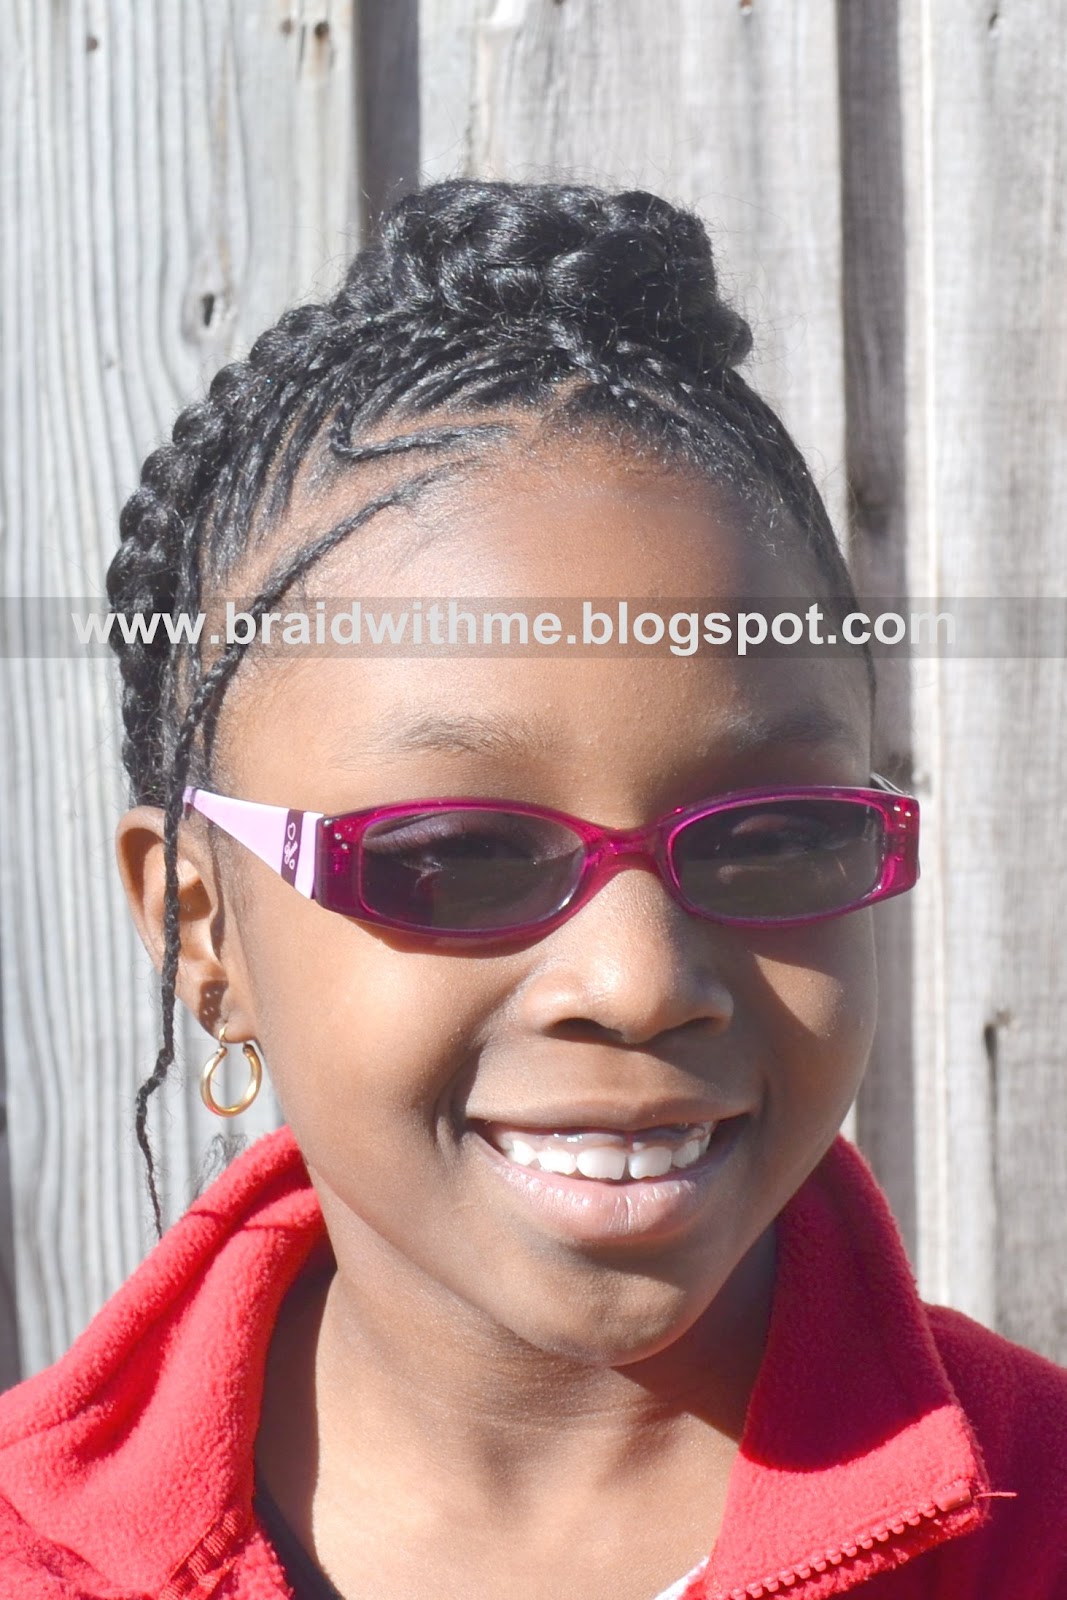 Braided Hairstyles For Little Girls With Beads Braided & Protected - Protective Hair Style on Child's Natural Hair